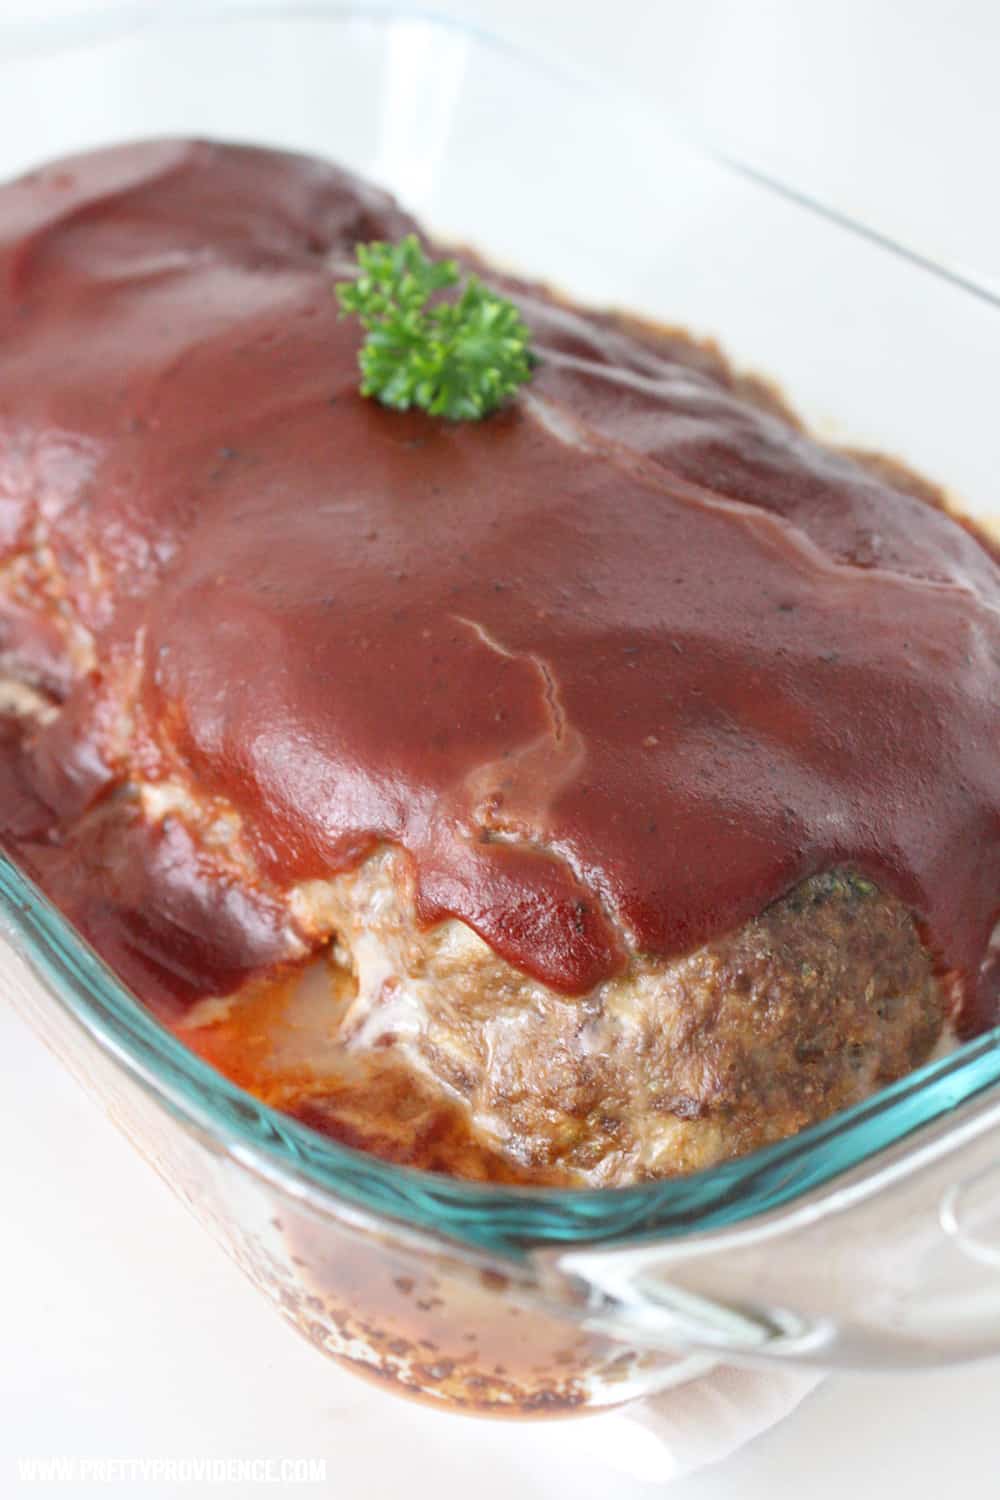 Totally obsessed with this classic meatloaf recipe! It's easy, delicious and always a crowd pleaser! 